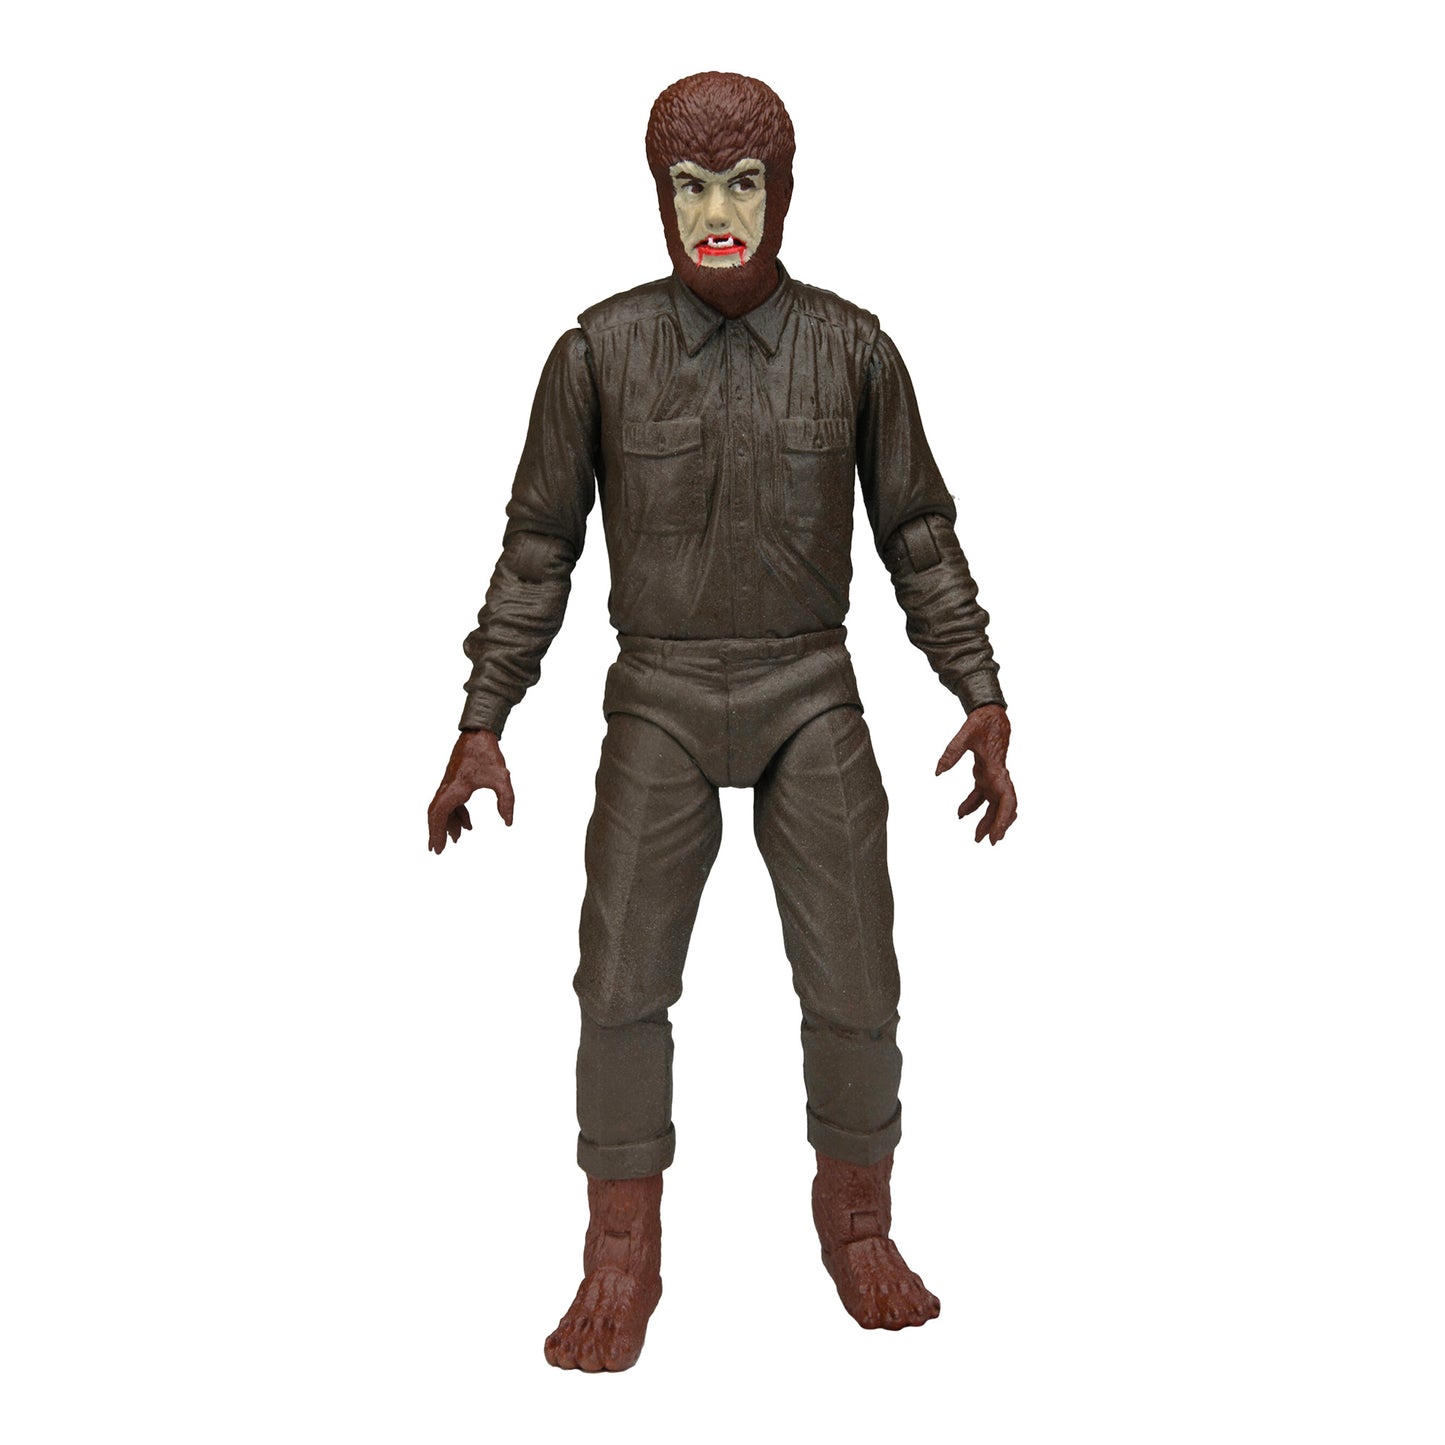 NECA: Universal Monsters - The Wolfman Glow in the Dark 7" Tall Action Figure